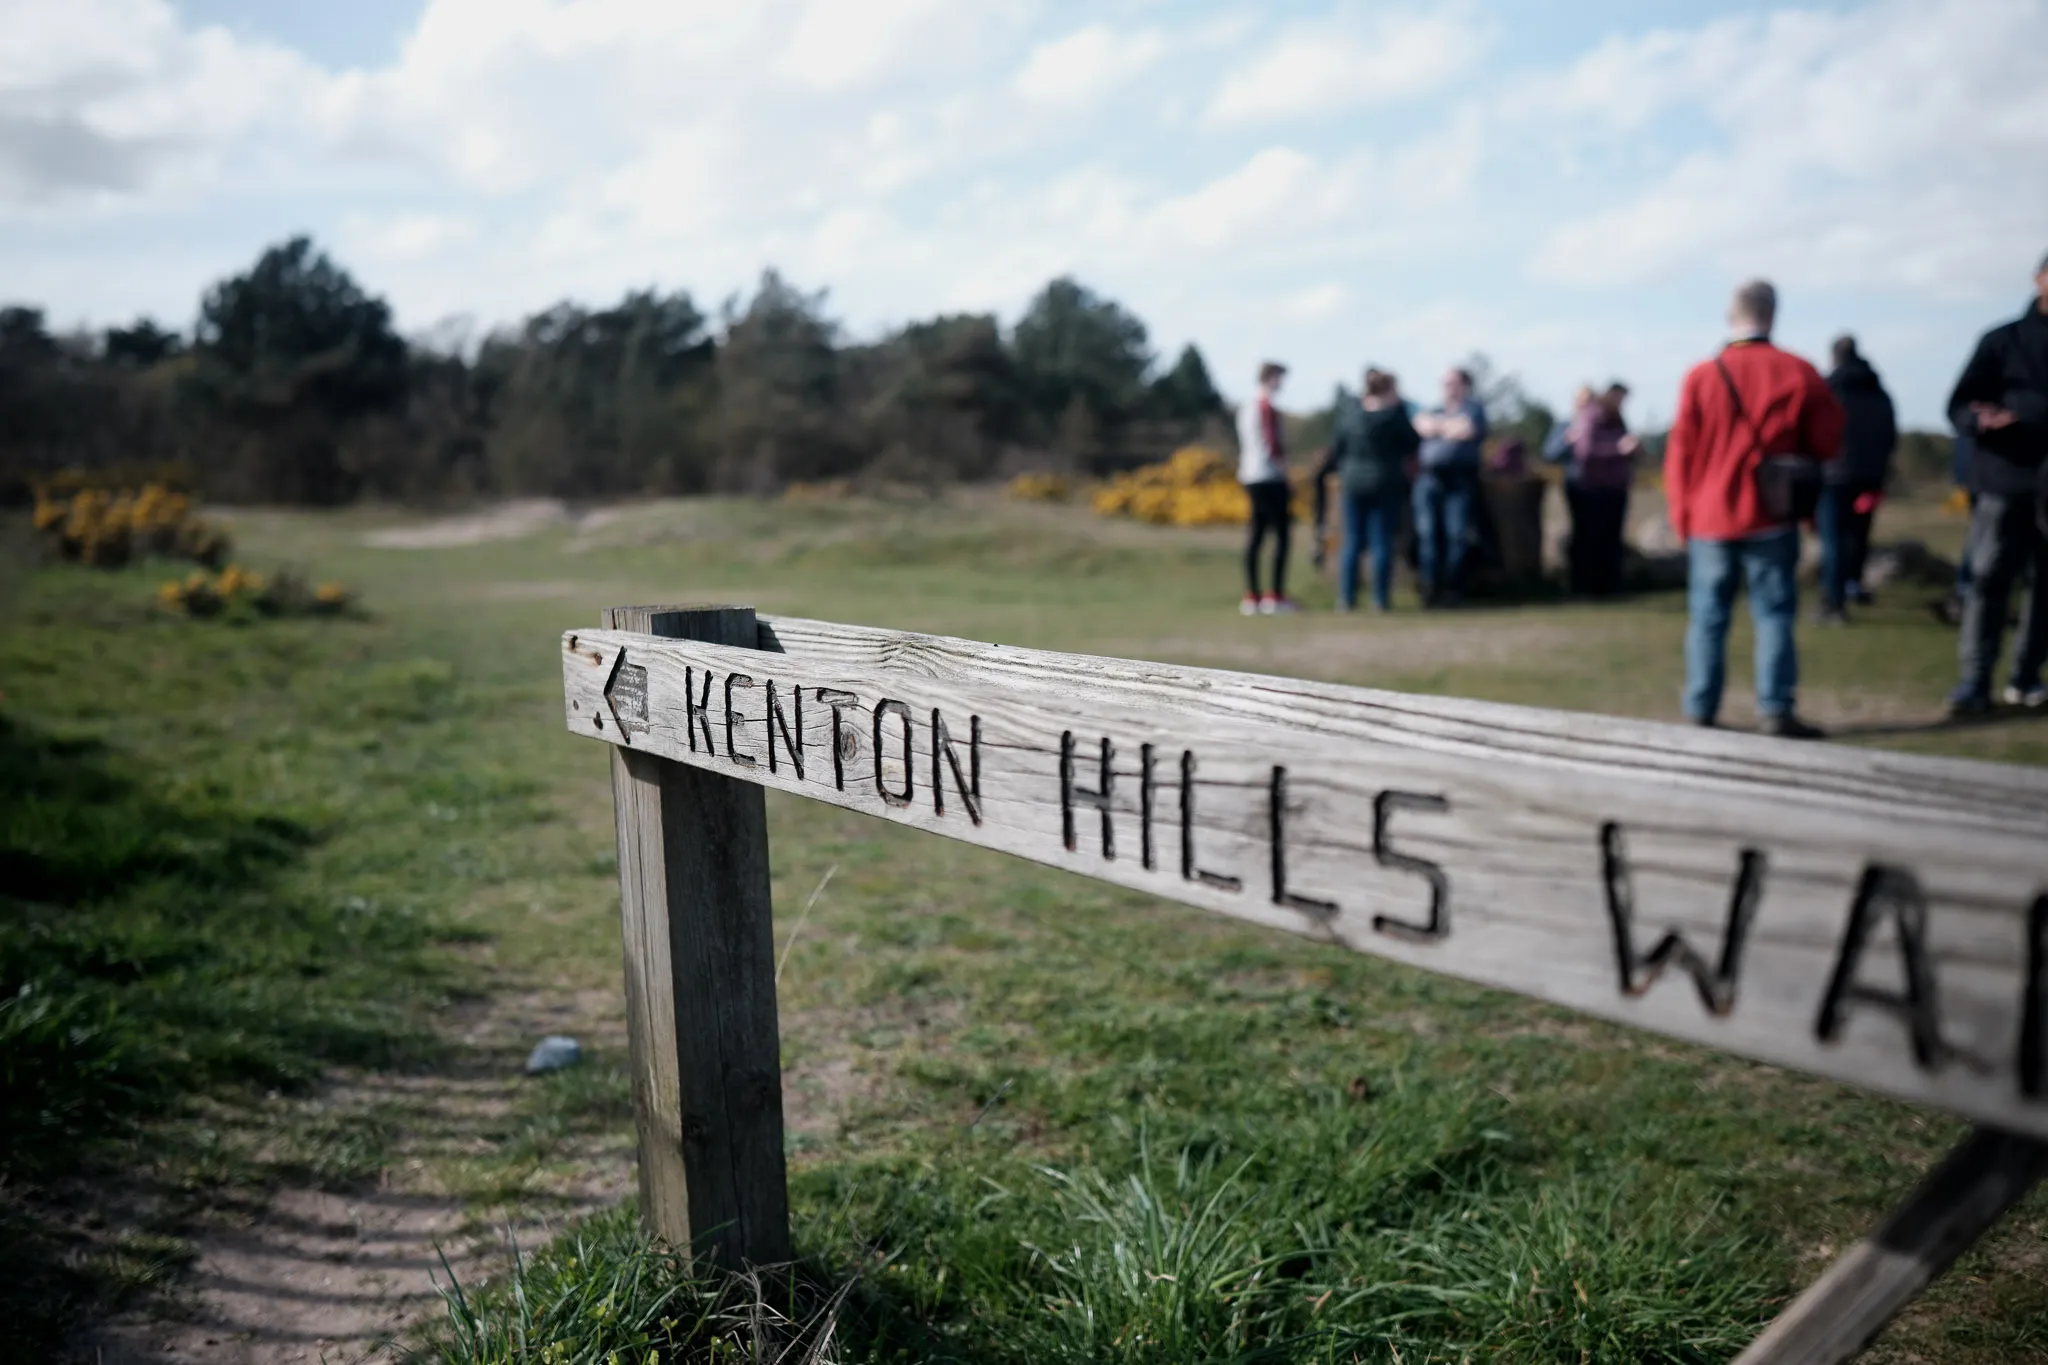 group of people standing behind an in-focus, slighty worn, wooden sign pointing towards "Kenton Hills..."